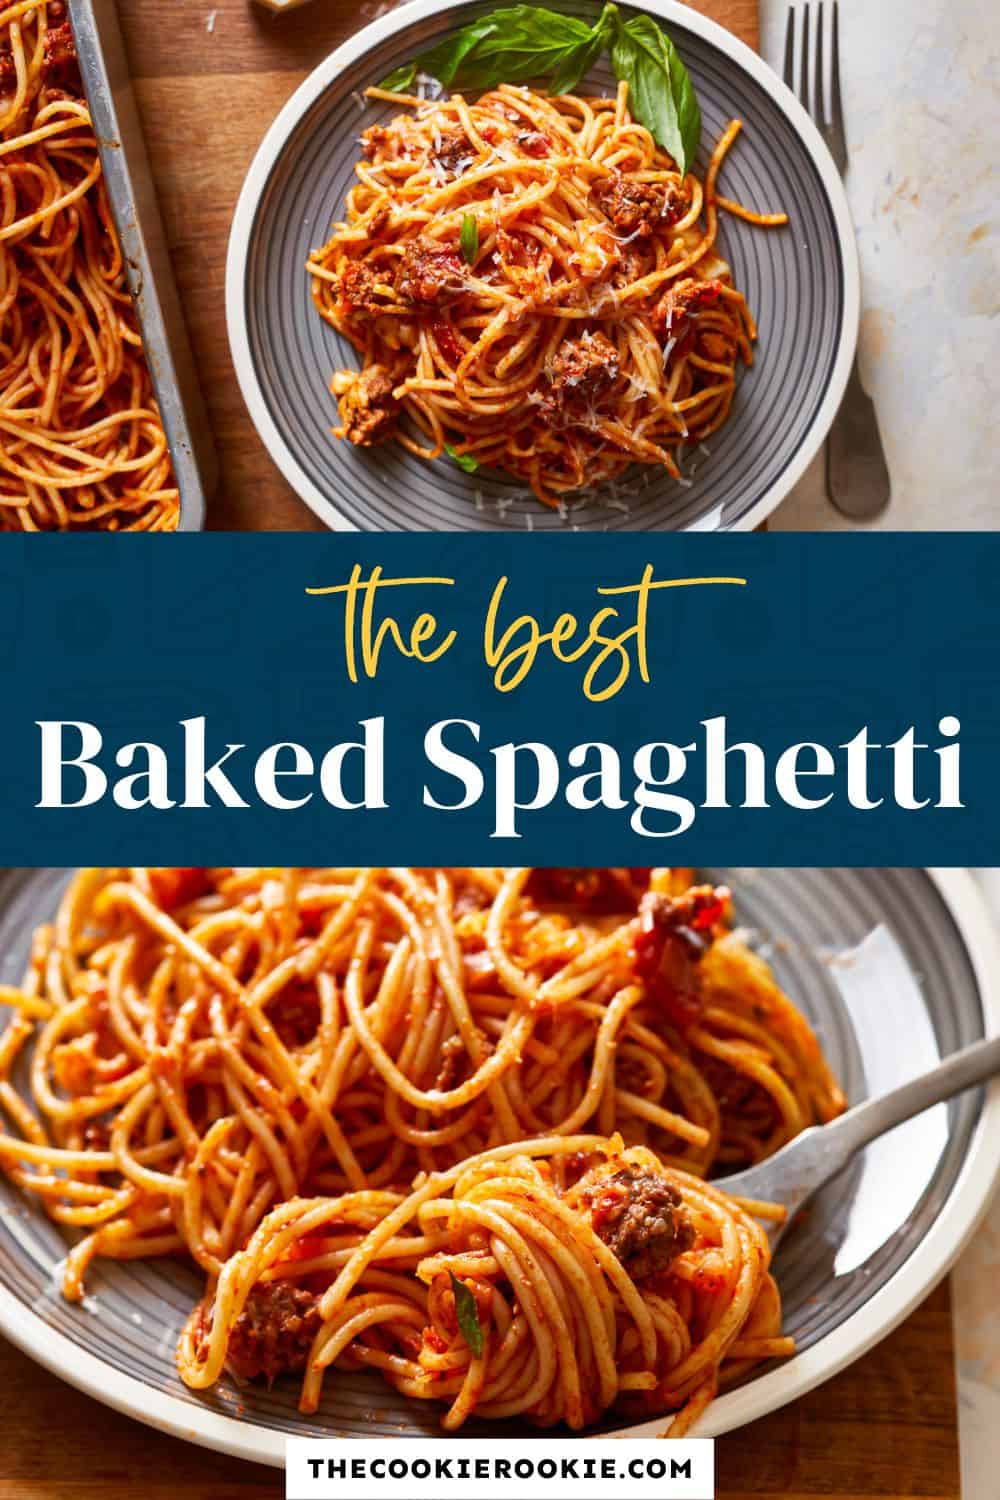 Baked Spaghetti Recipe - The Cookie Rookie®